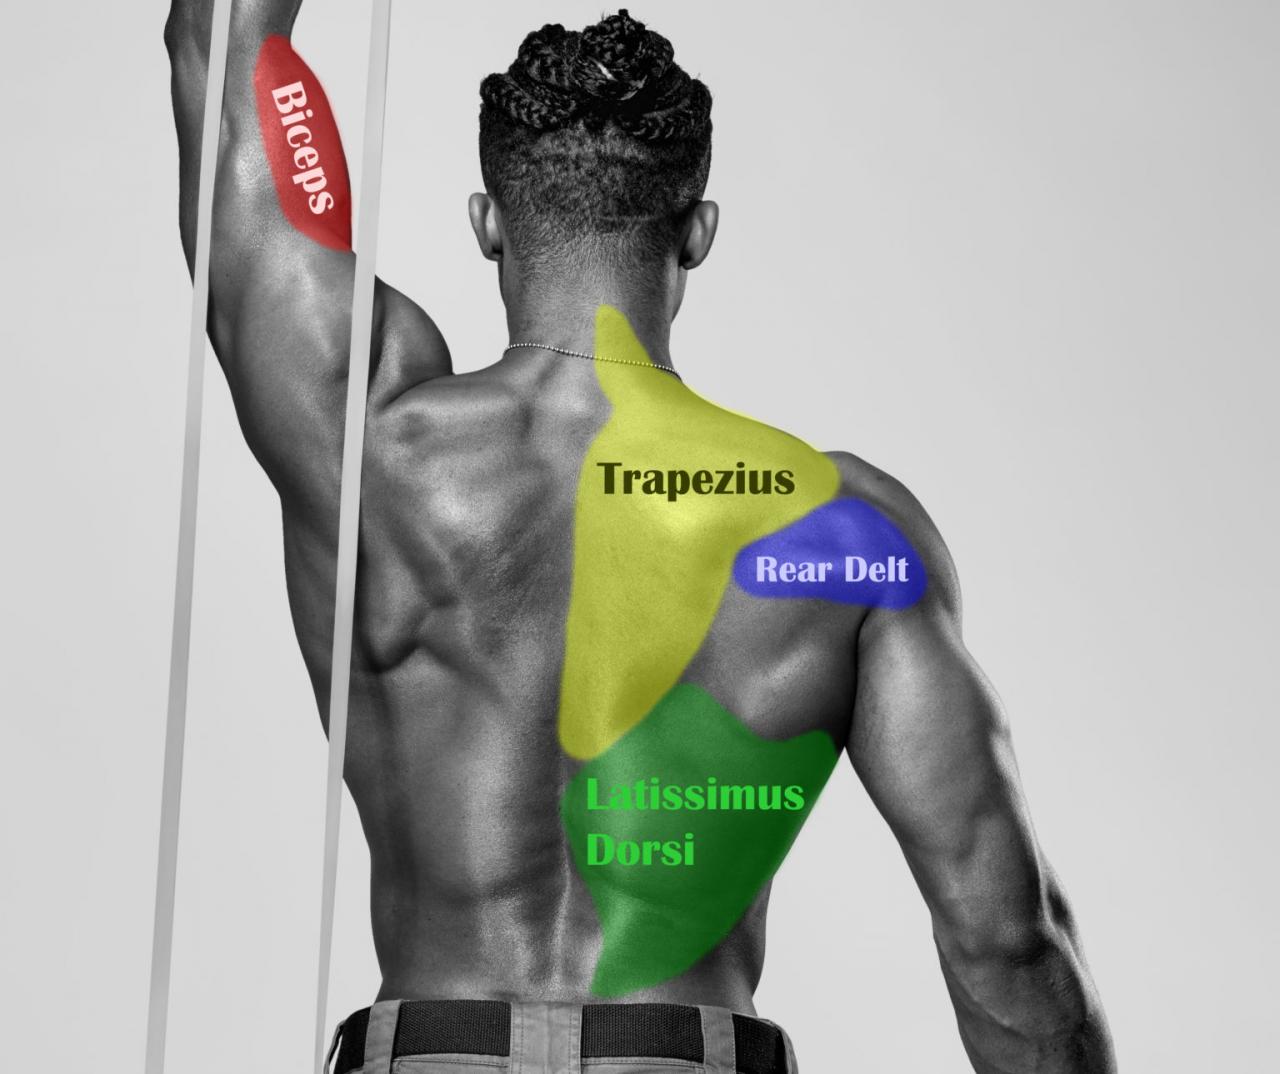 Muscles back body rhomboid major teres trapezius bodybuilding muscle anatomy latissimus rear erector exercises builder deltoid builders workout muscular gym